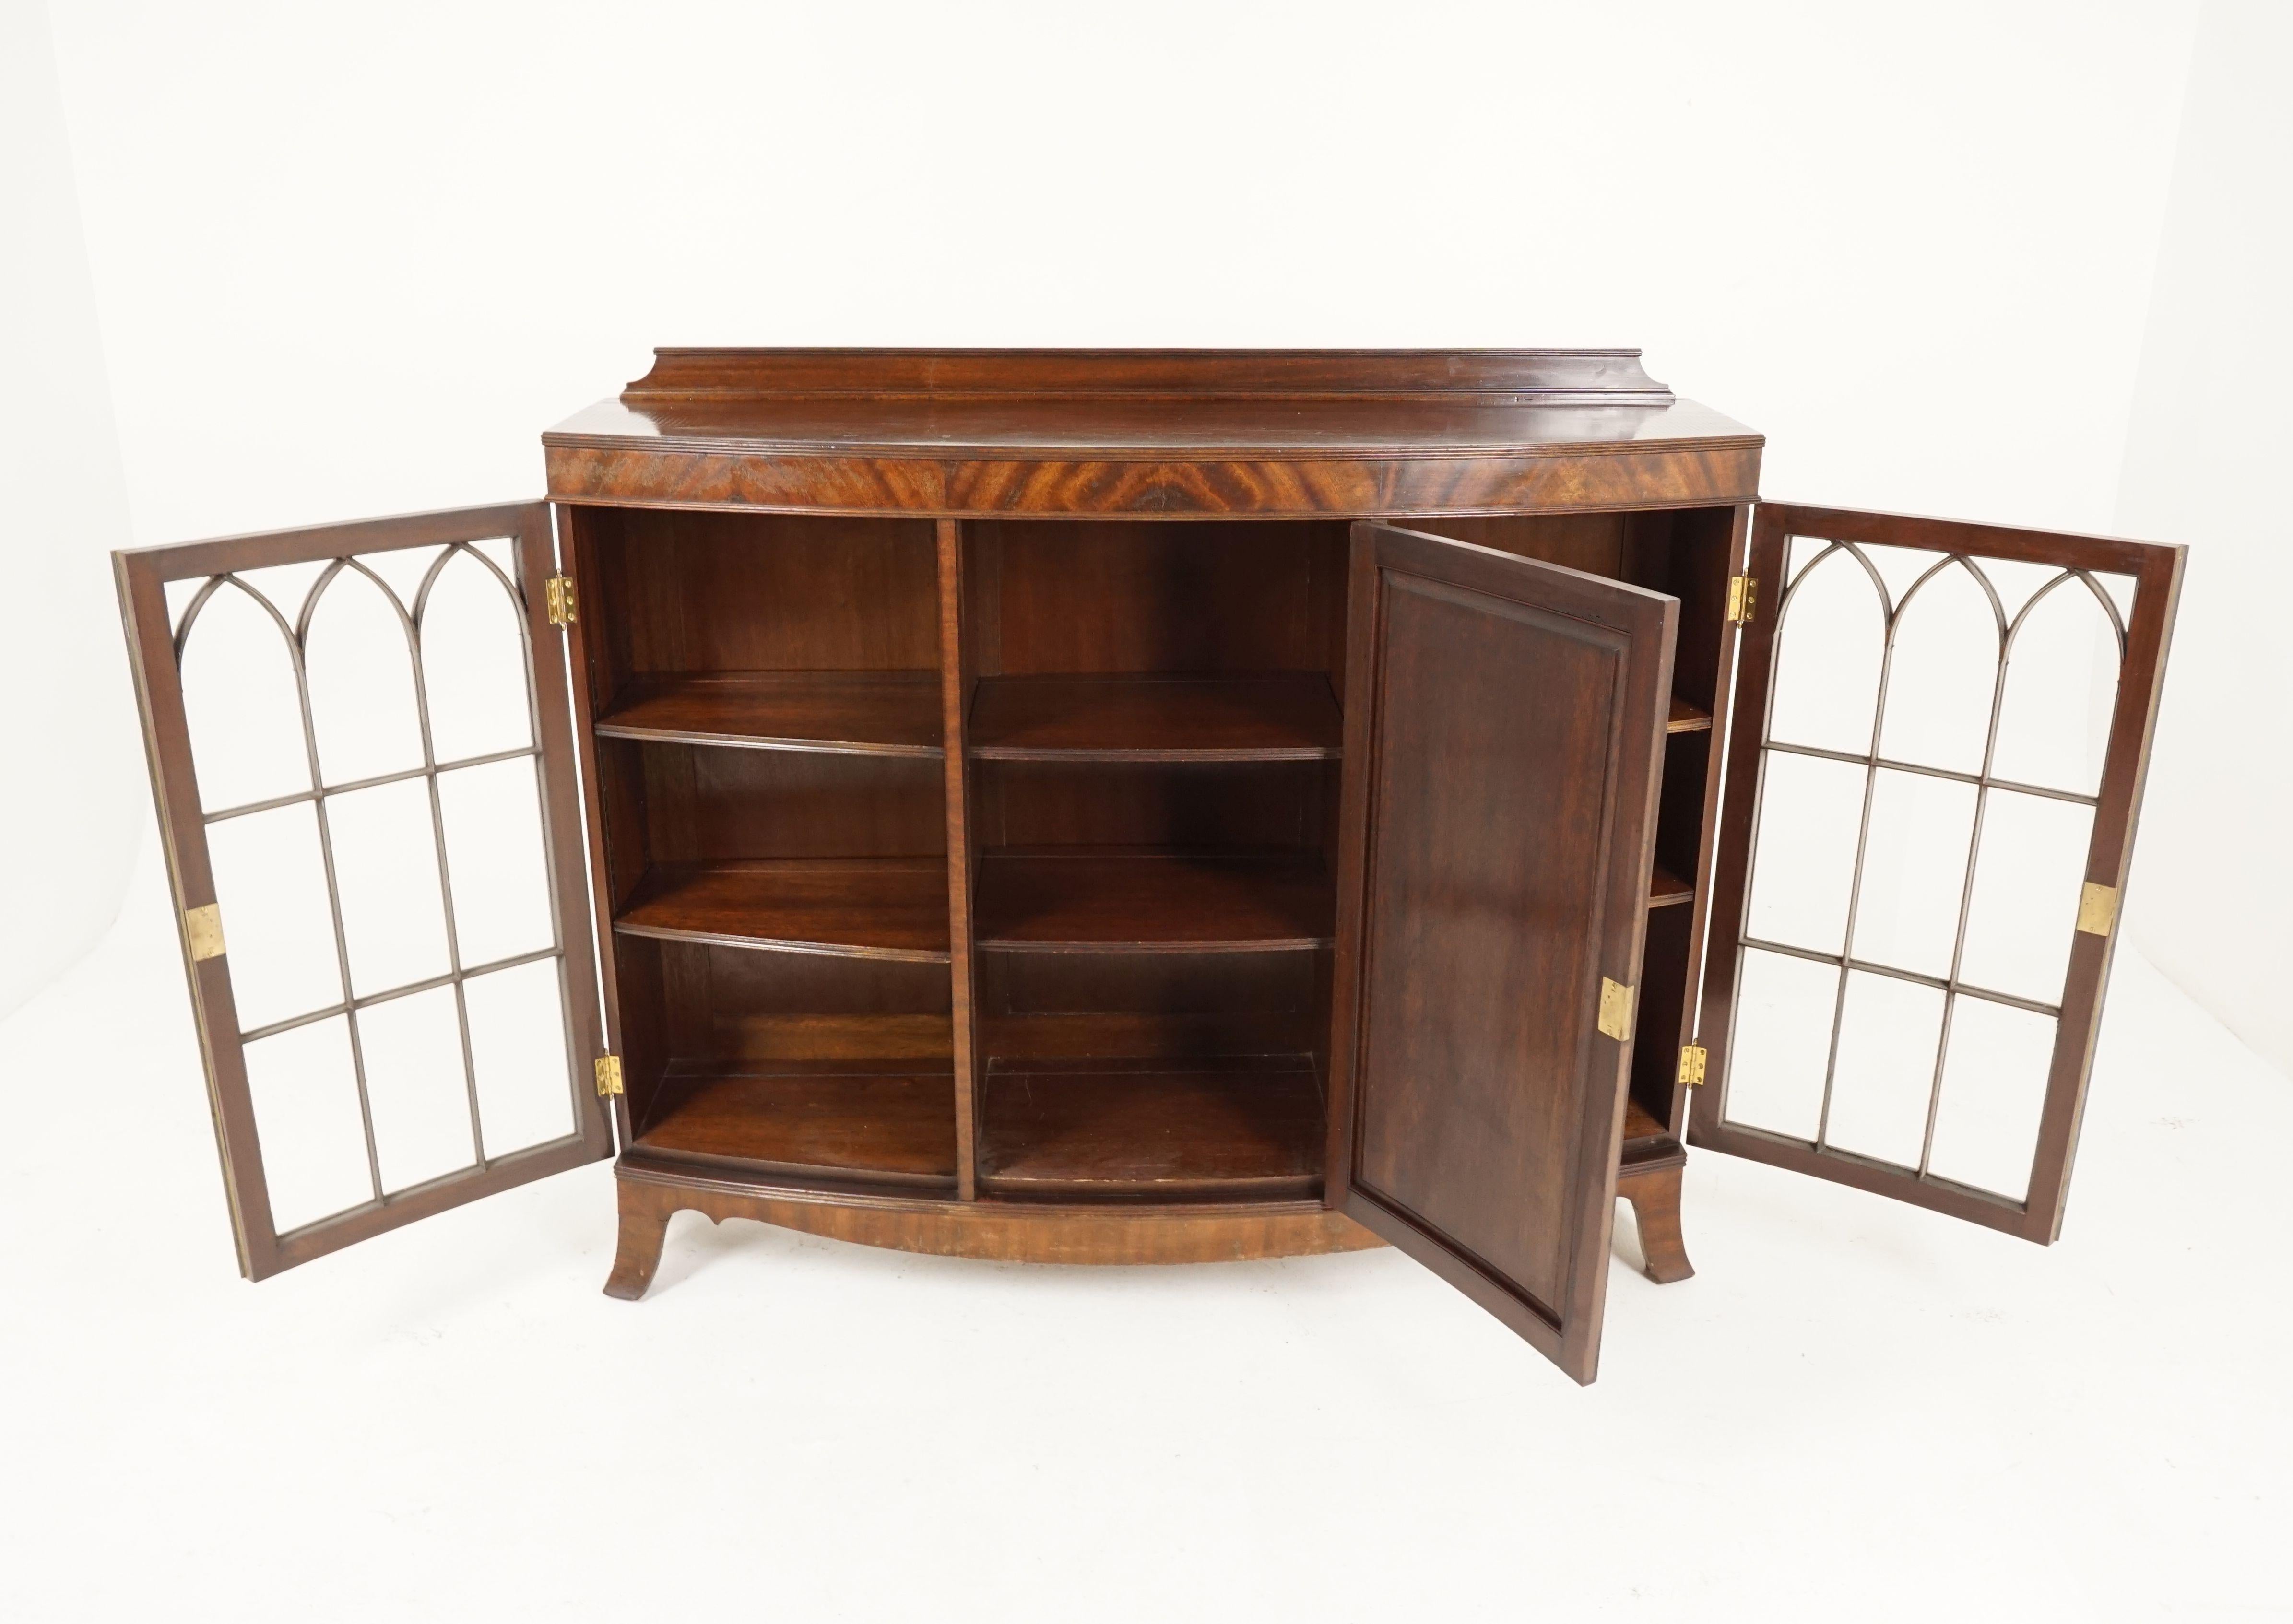 Hand-Crafted Antique Bow Front Mahogany Bookcase, 3 Door Display Cabinet, Scotland 1920 B2165